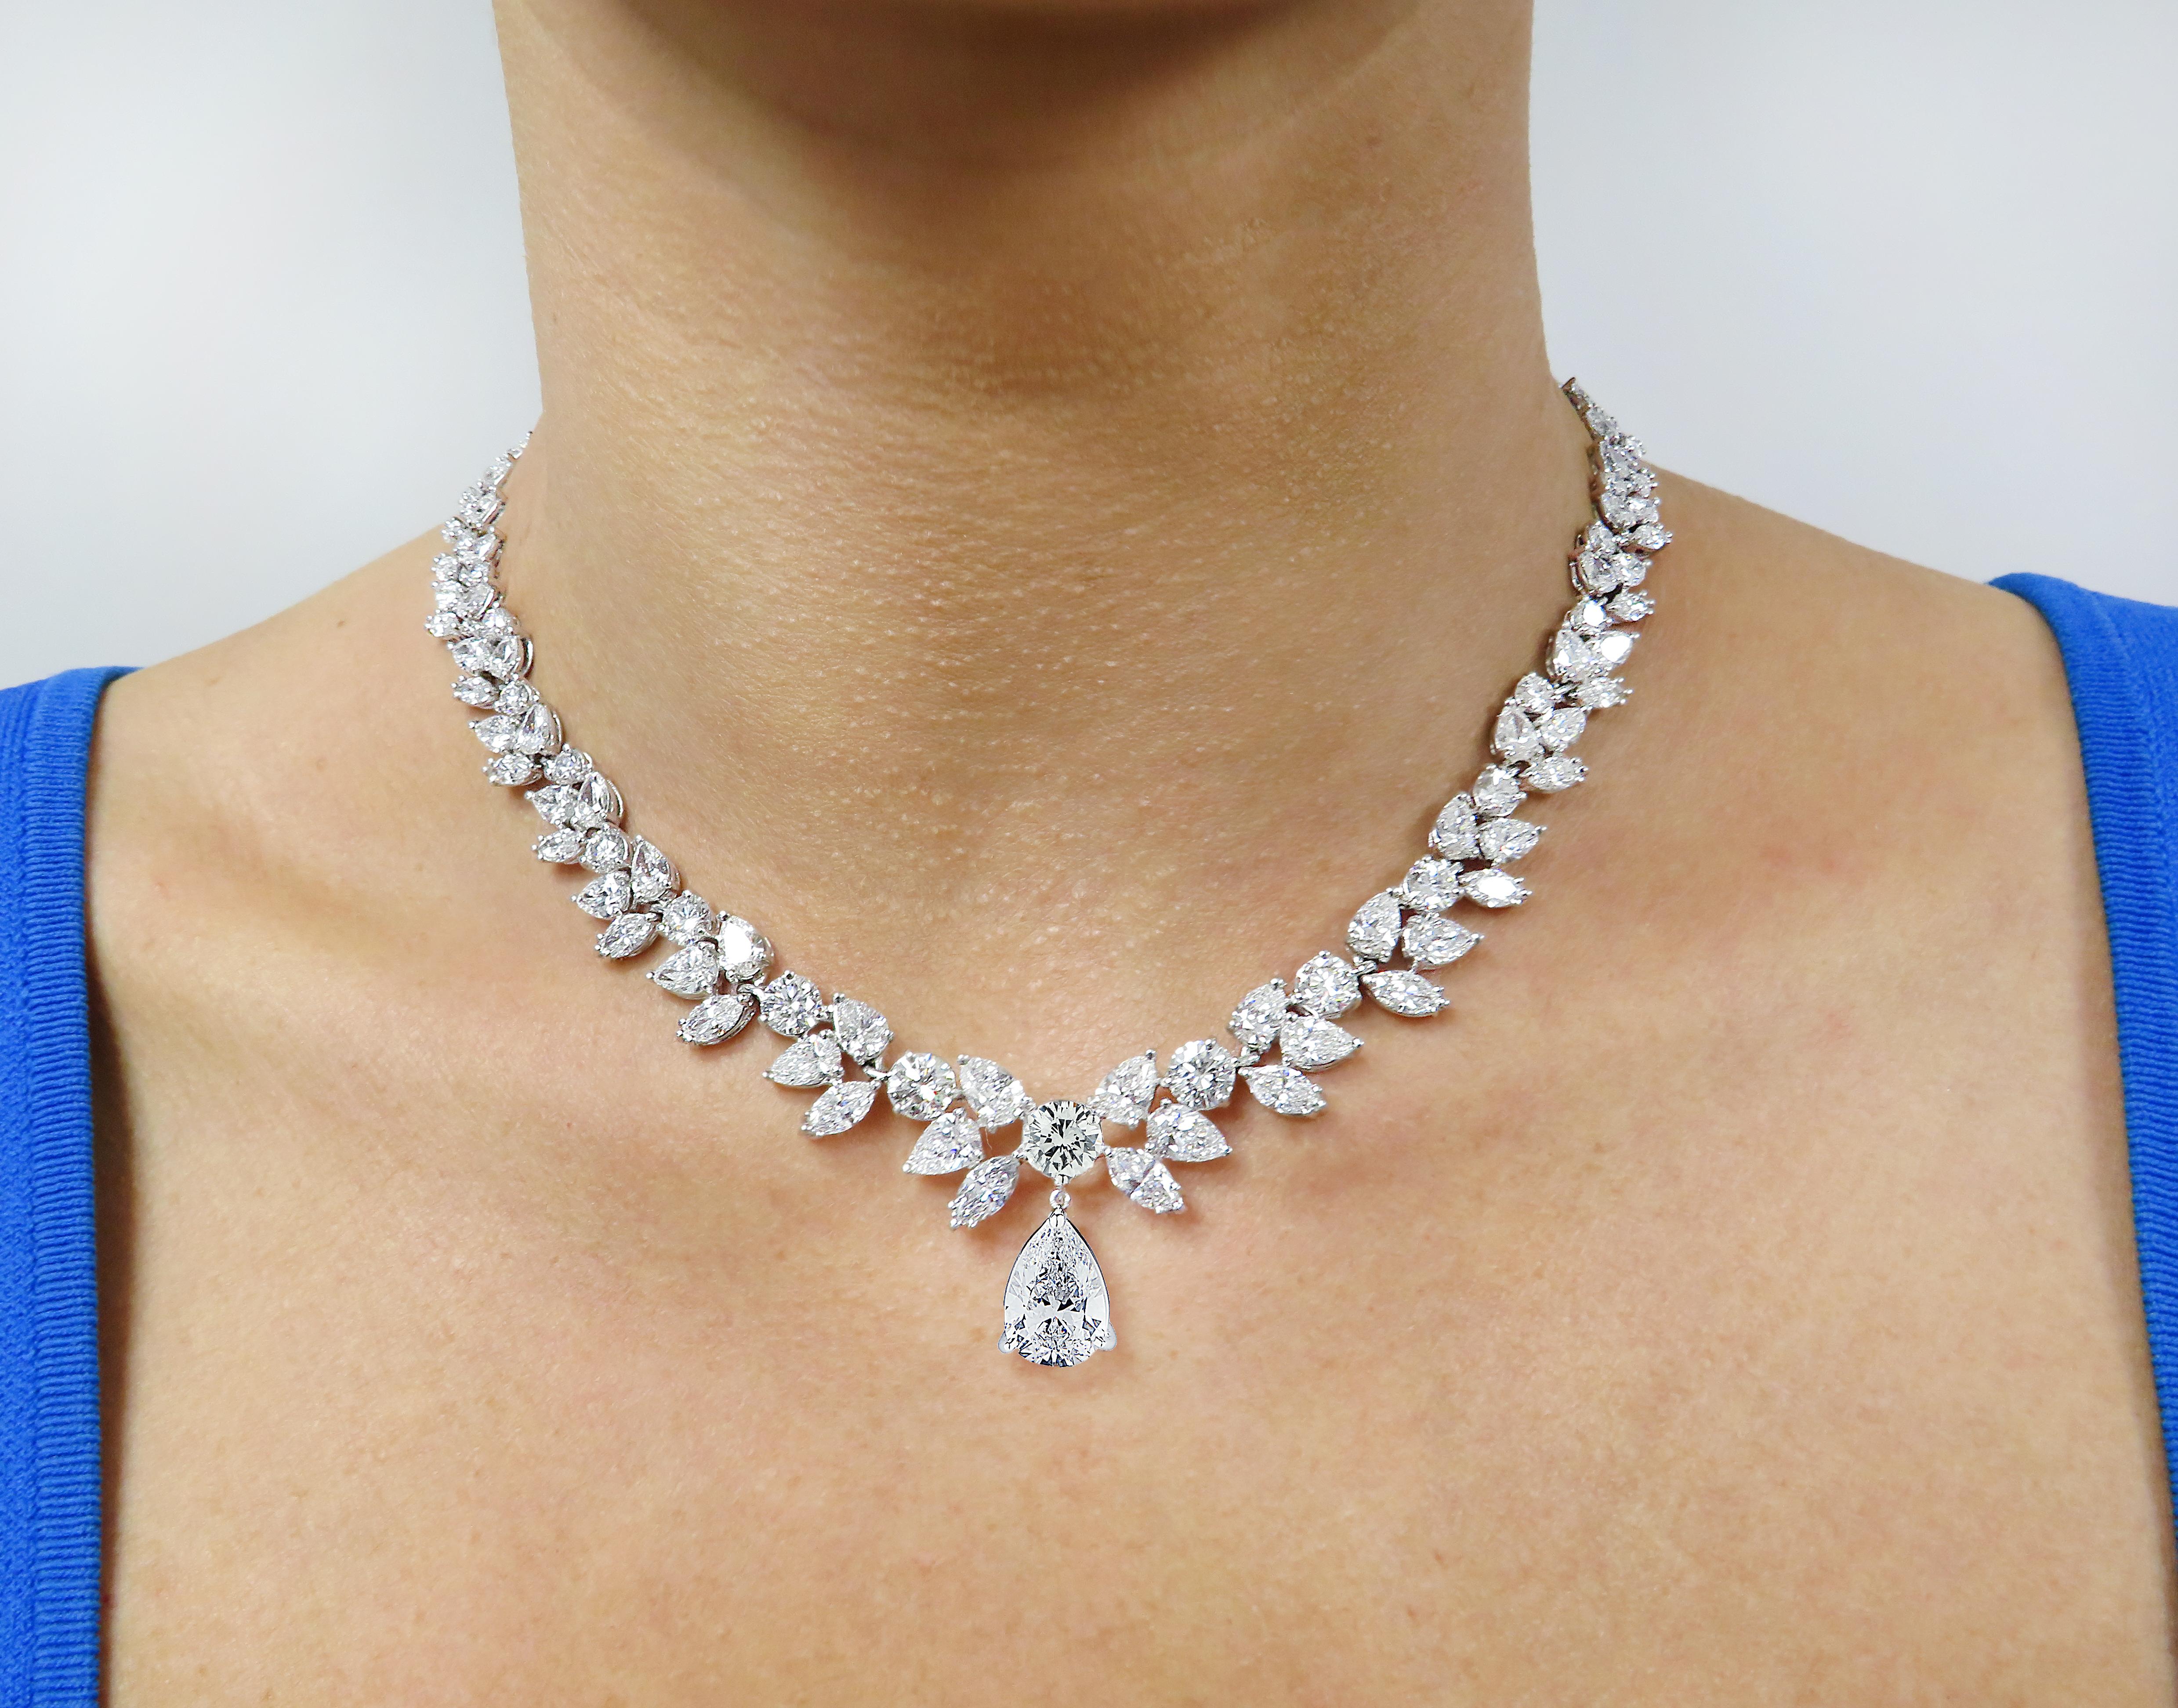 Sensational Vivid Diamonds diamond necklace, finely crafted in platinum, showcasing pear shape, marquise and round brilliant cut diamonds weighing approximately 40.10 carats total, D-E color, VVS-VS clarity, 12 of which are certified by the GIA. The